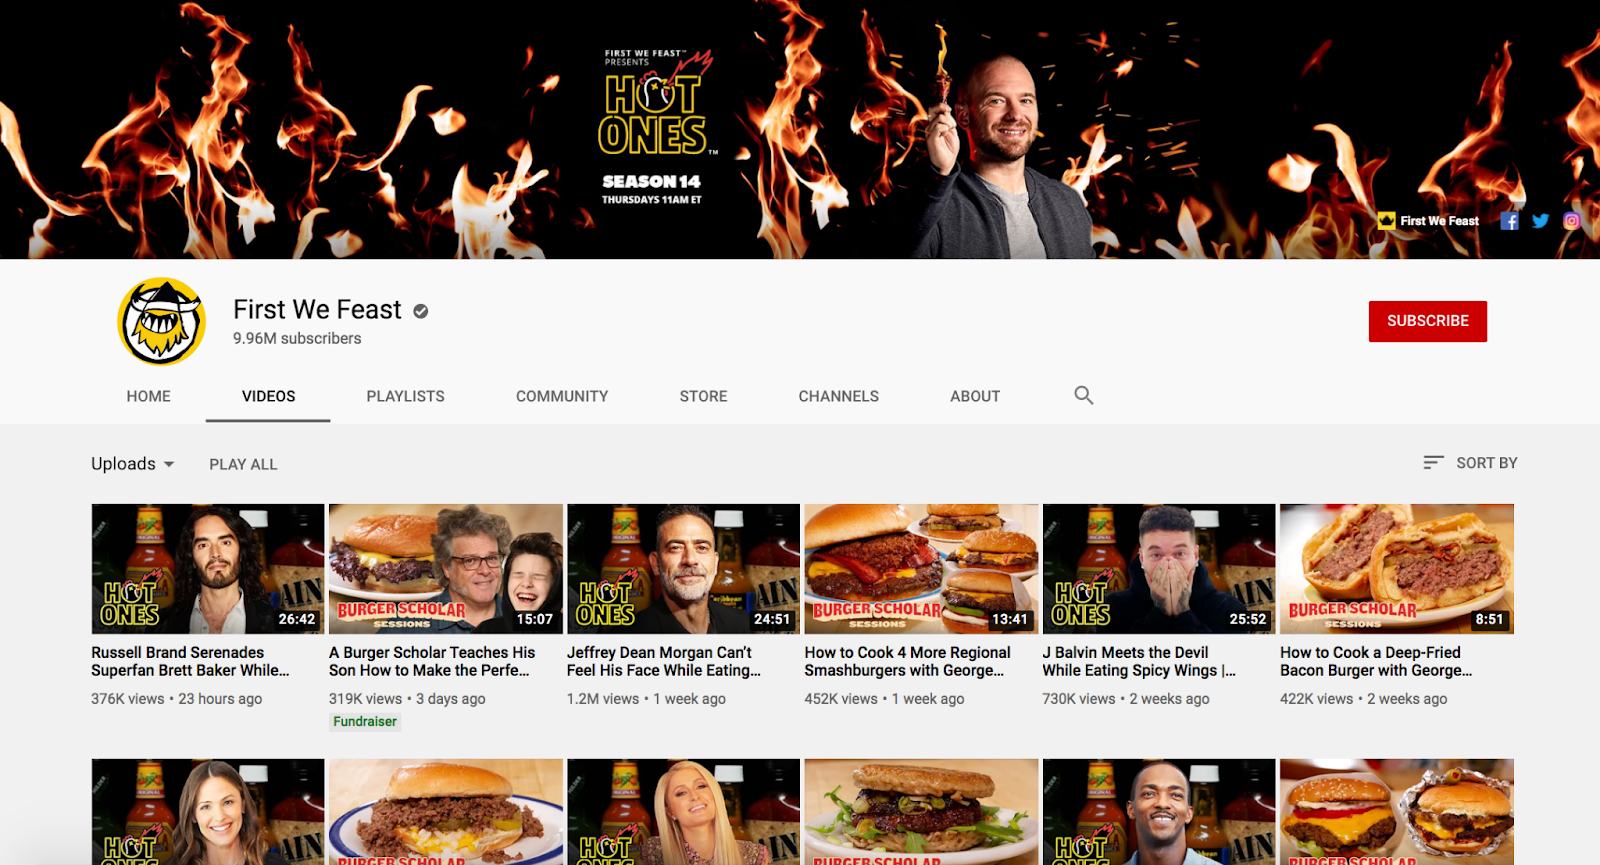 First We Feast YouTube channel homepage featuring the new season of Hot Ones